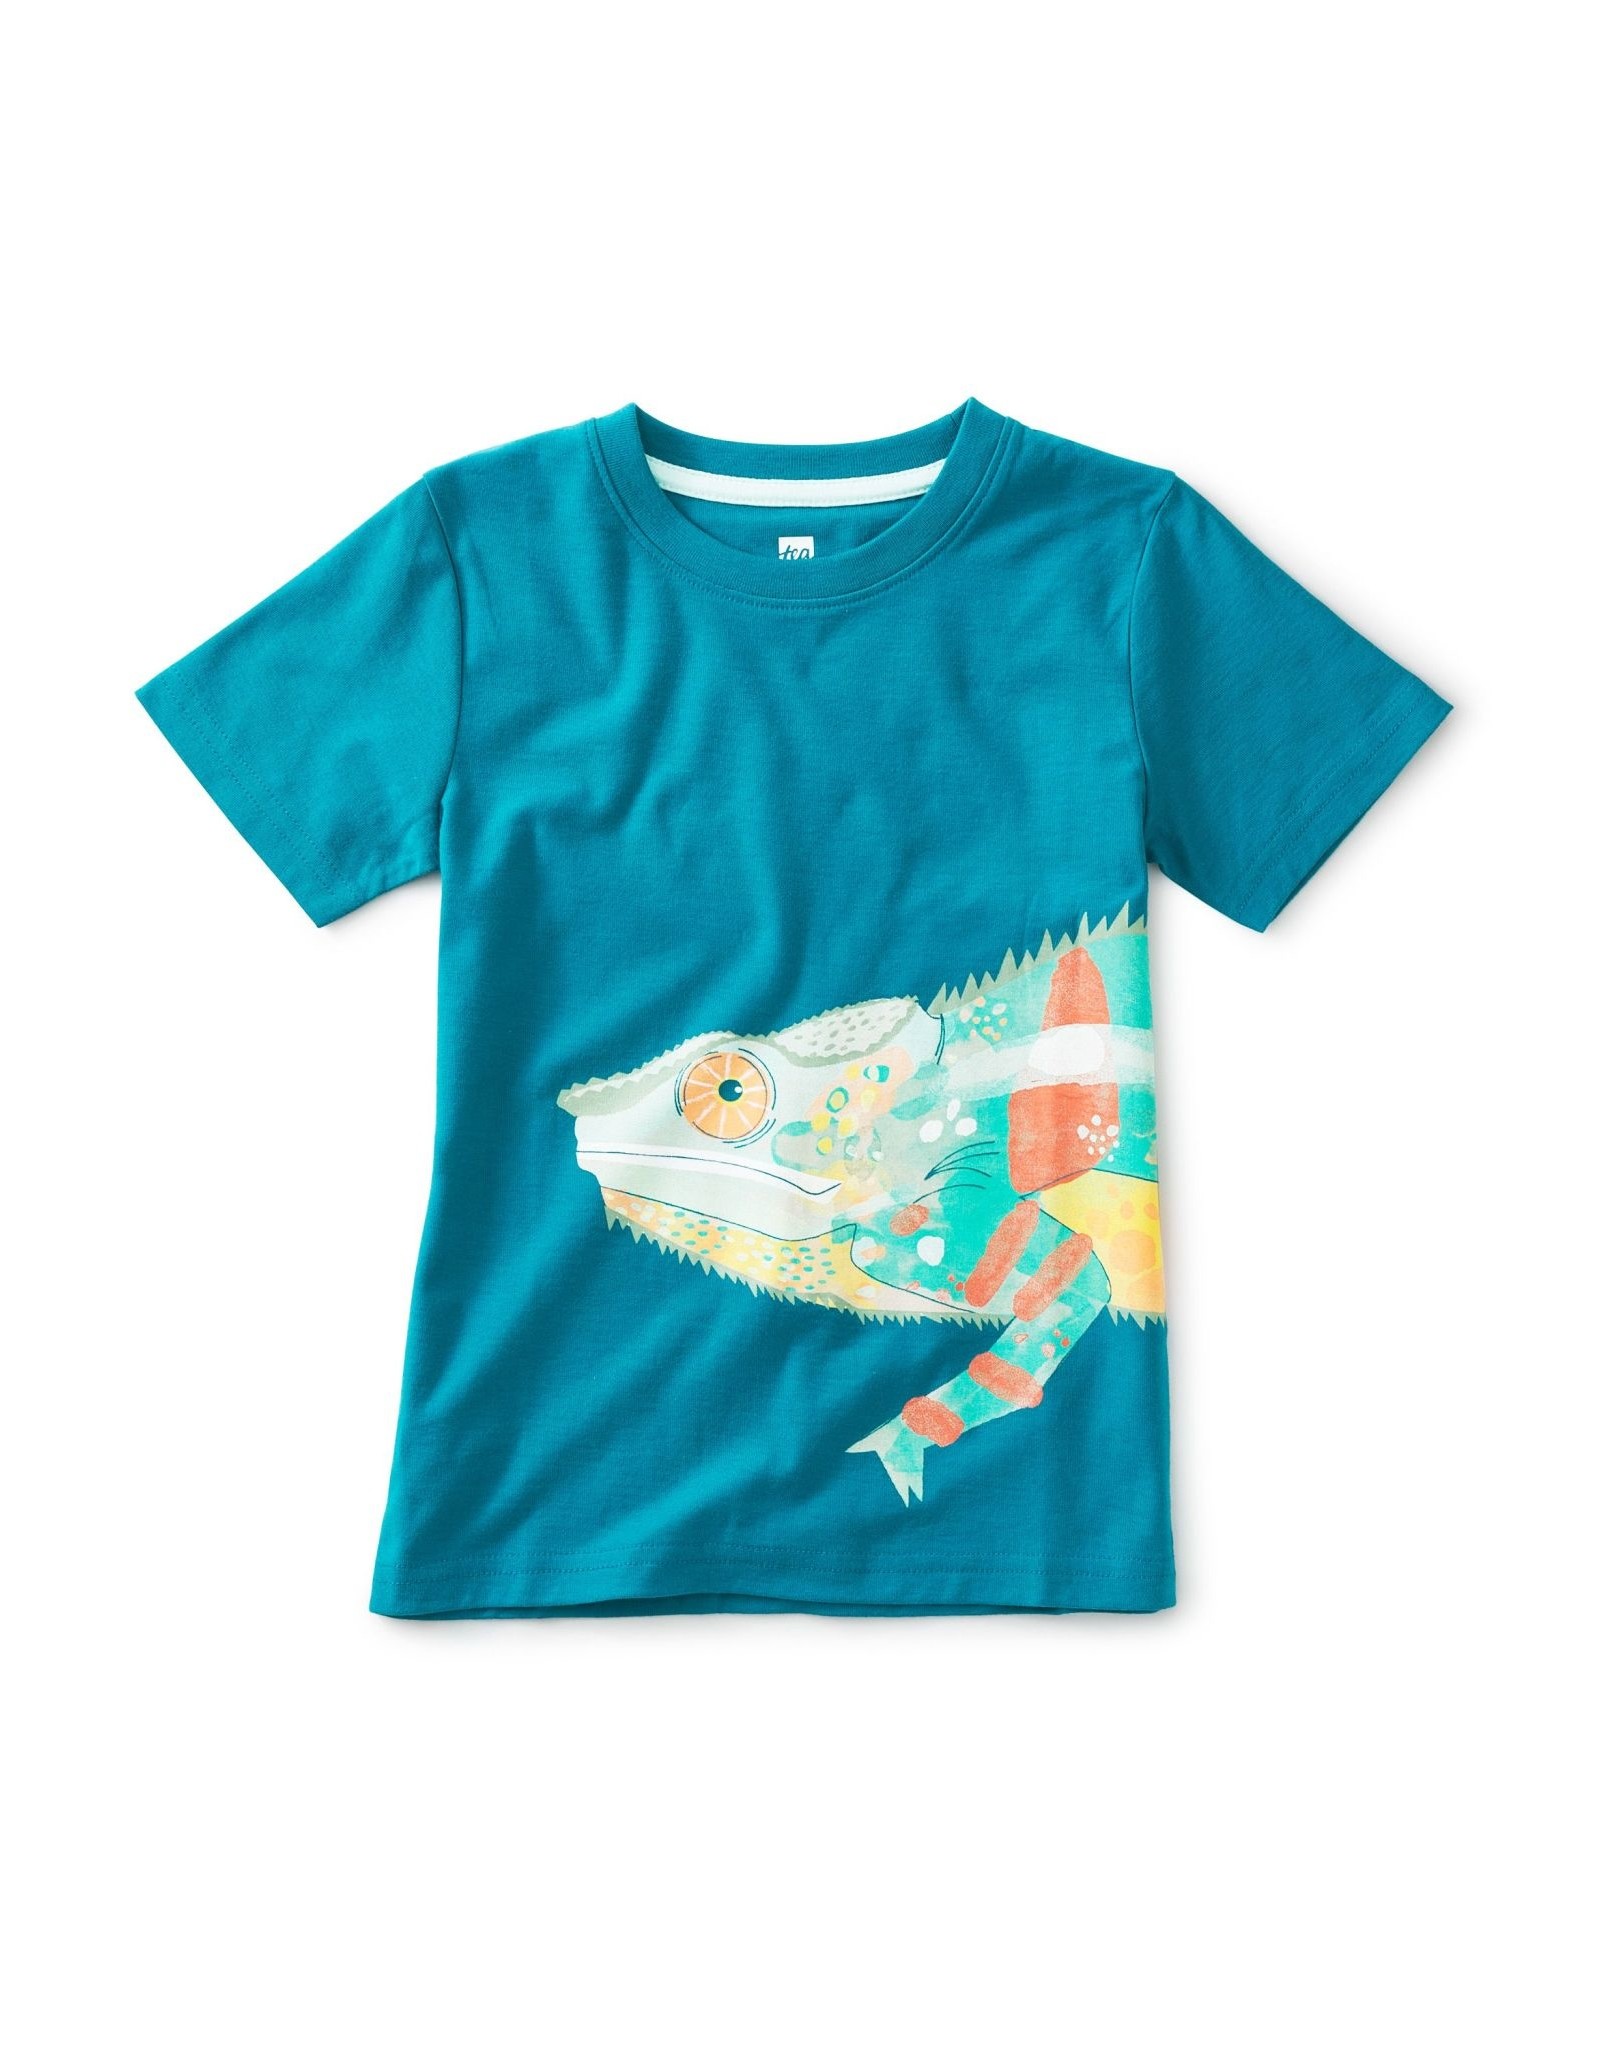 Tea Collection Panther Chameleon Graphic Tee